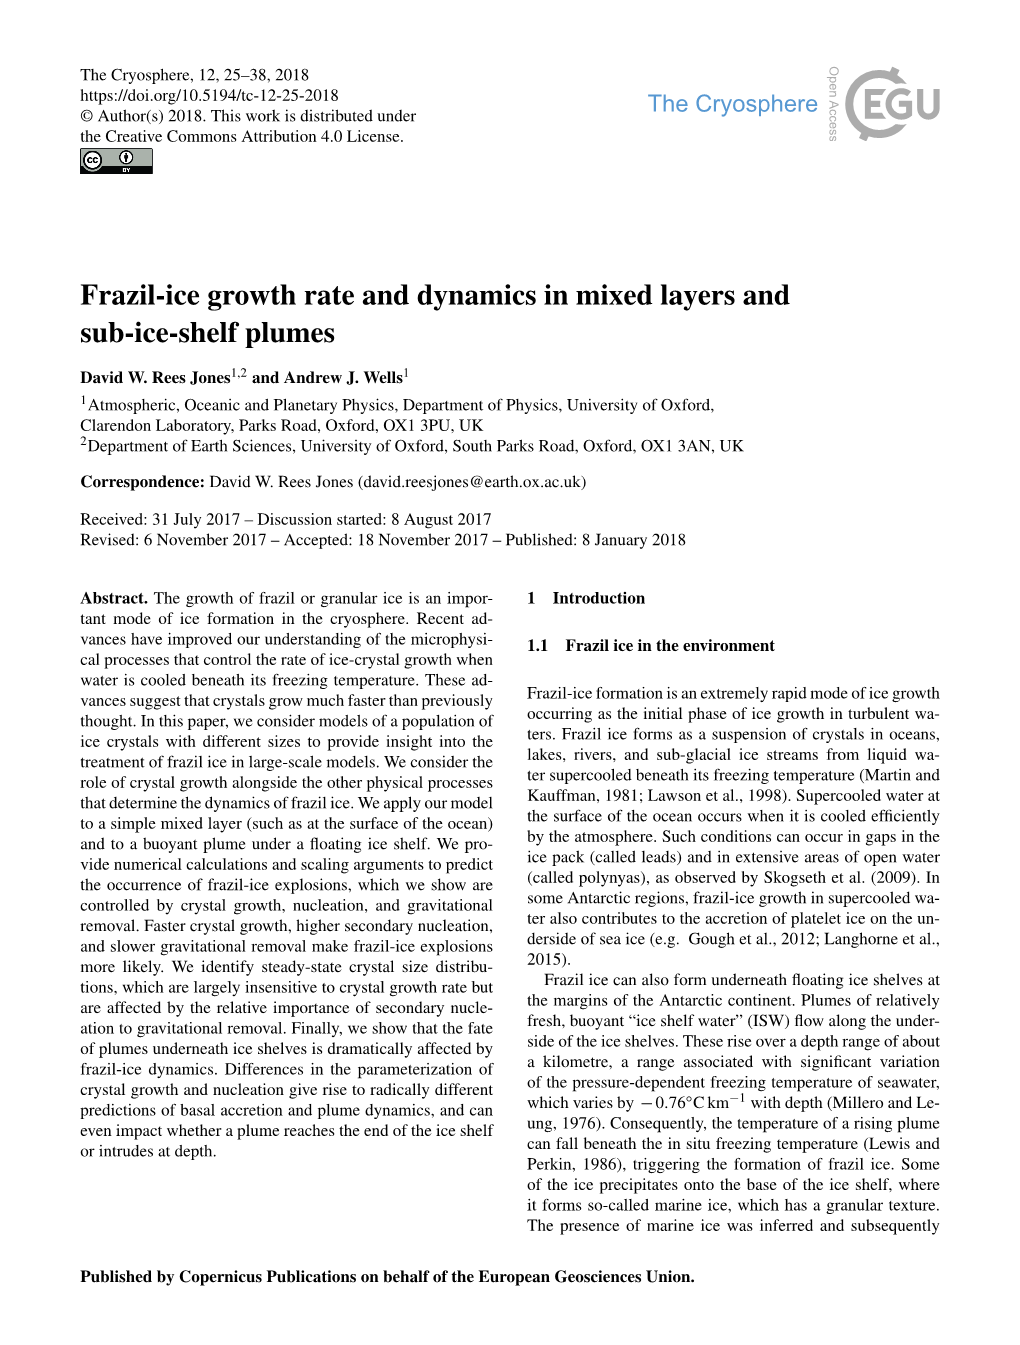 Frazil-Ice Growth Rate and Dynamics in Mixed Layers and Sub-Ice-Shelf Plumes